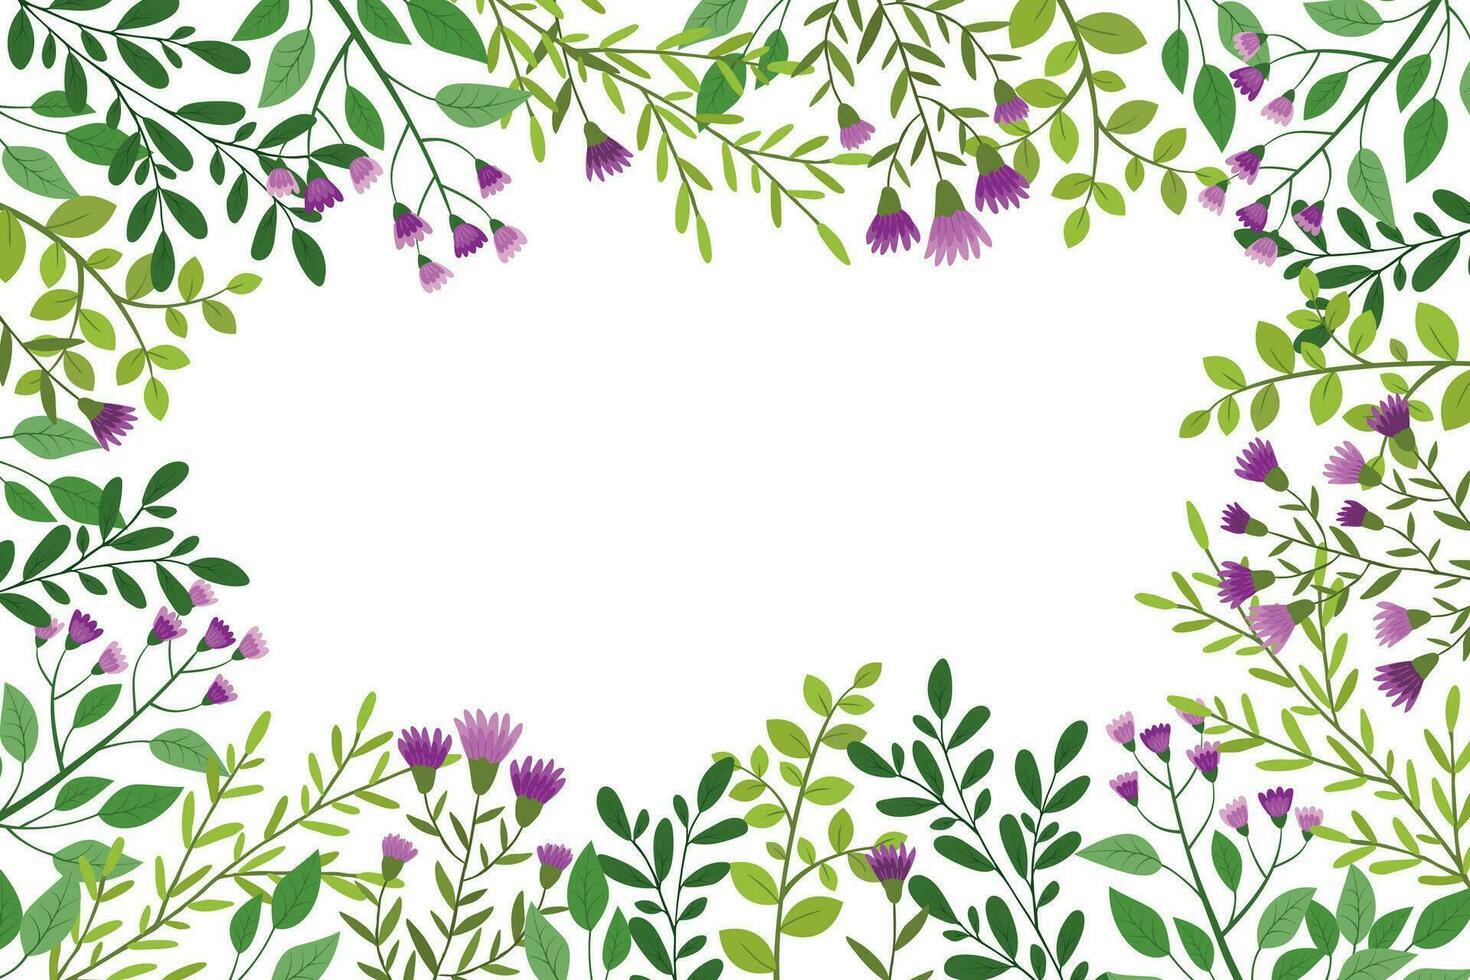 Cute hand drawn frame with floral elements, herbs, leaves, flowers, twigs. Vector illustration for wedding design, logo and greeting card.